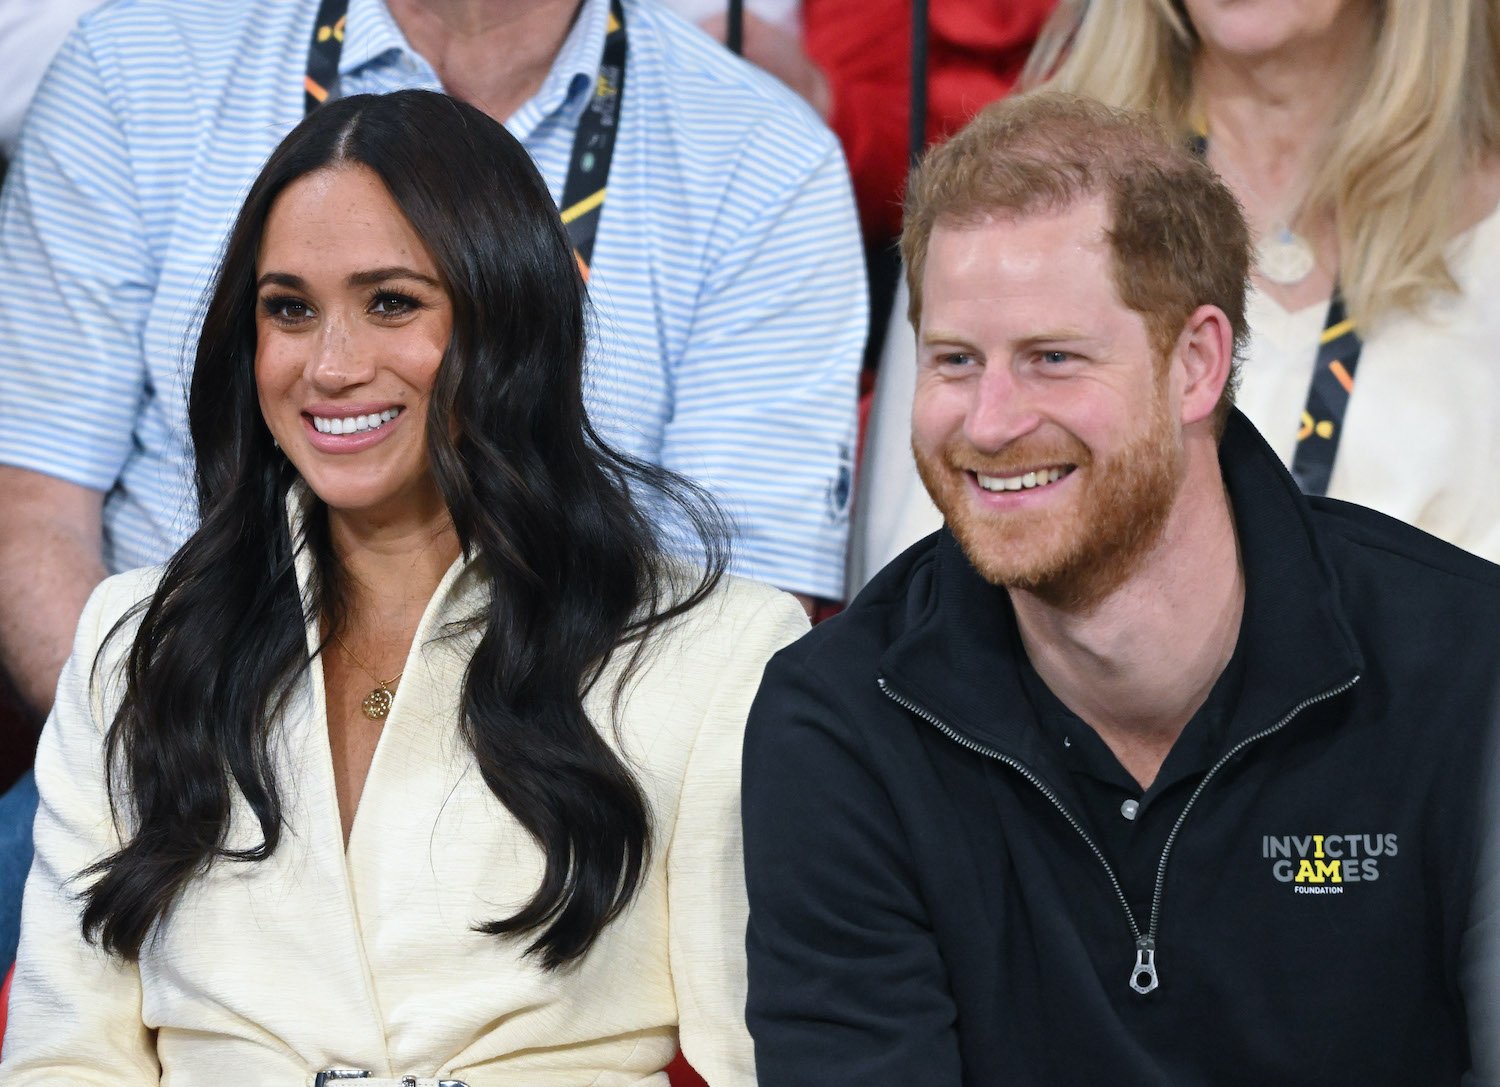 Donald Trump Doesn’t Think Prince Harry and Meghan Markle’s Marriage Will Last: ‘It’ll End Bad’